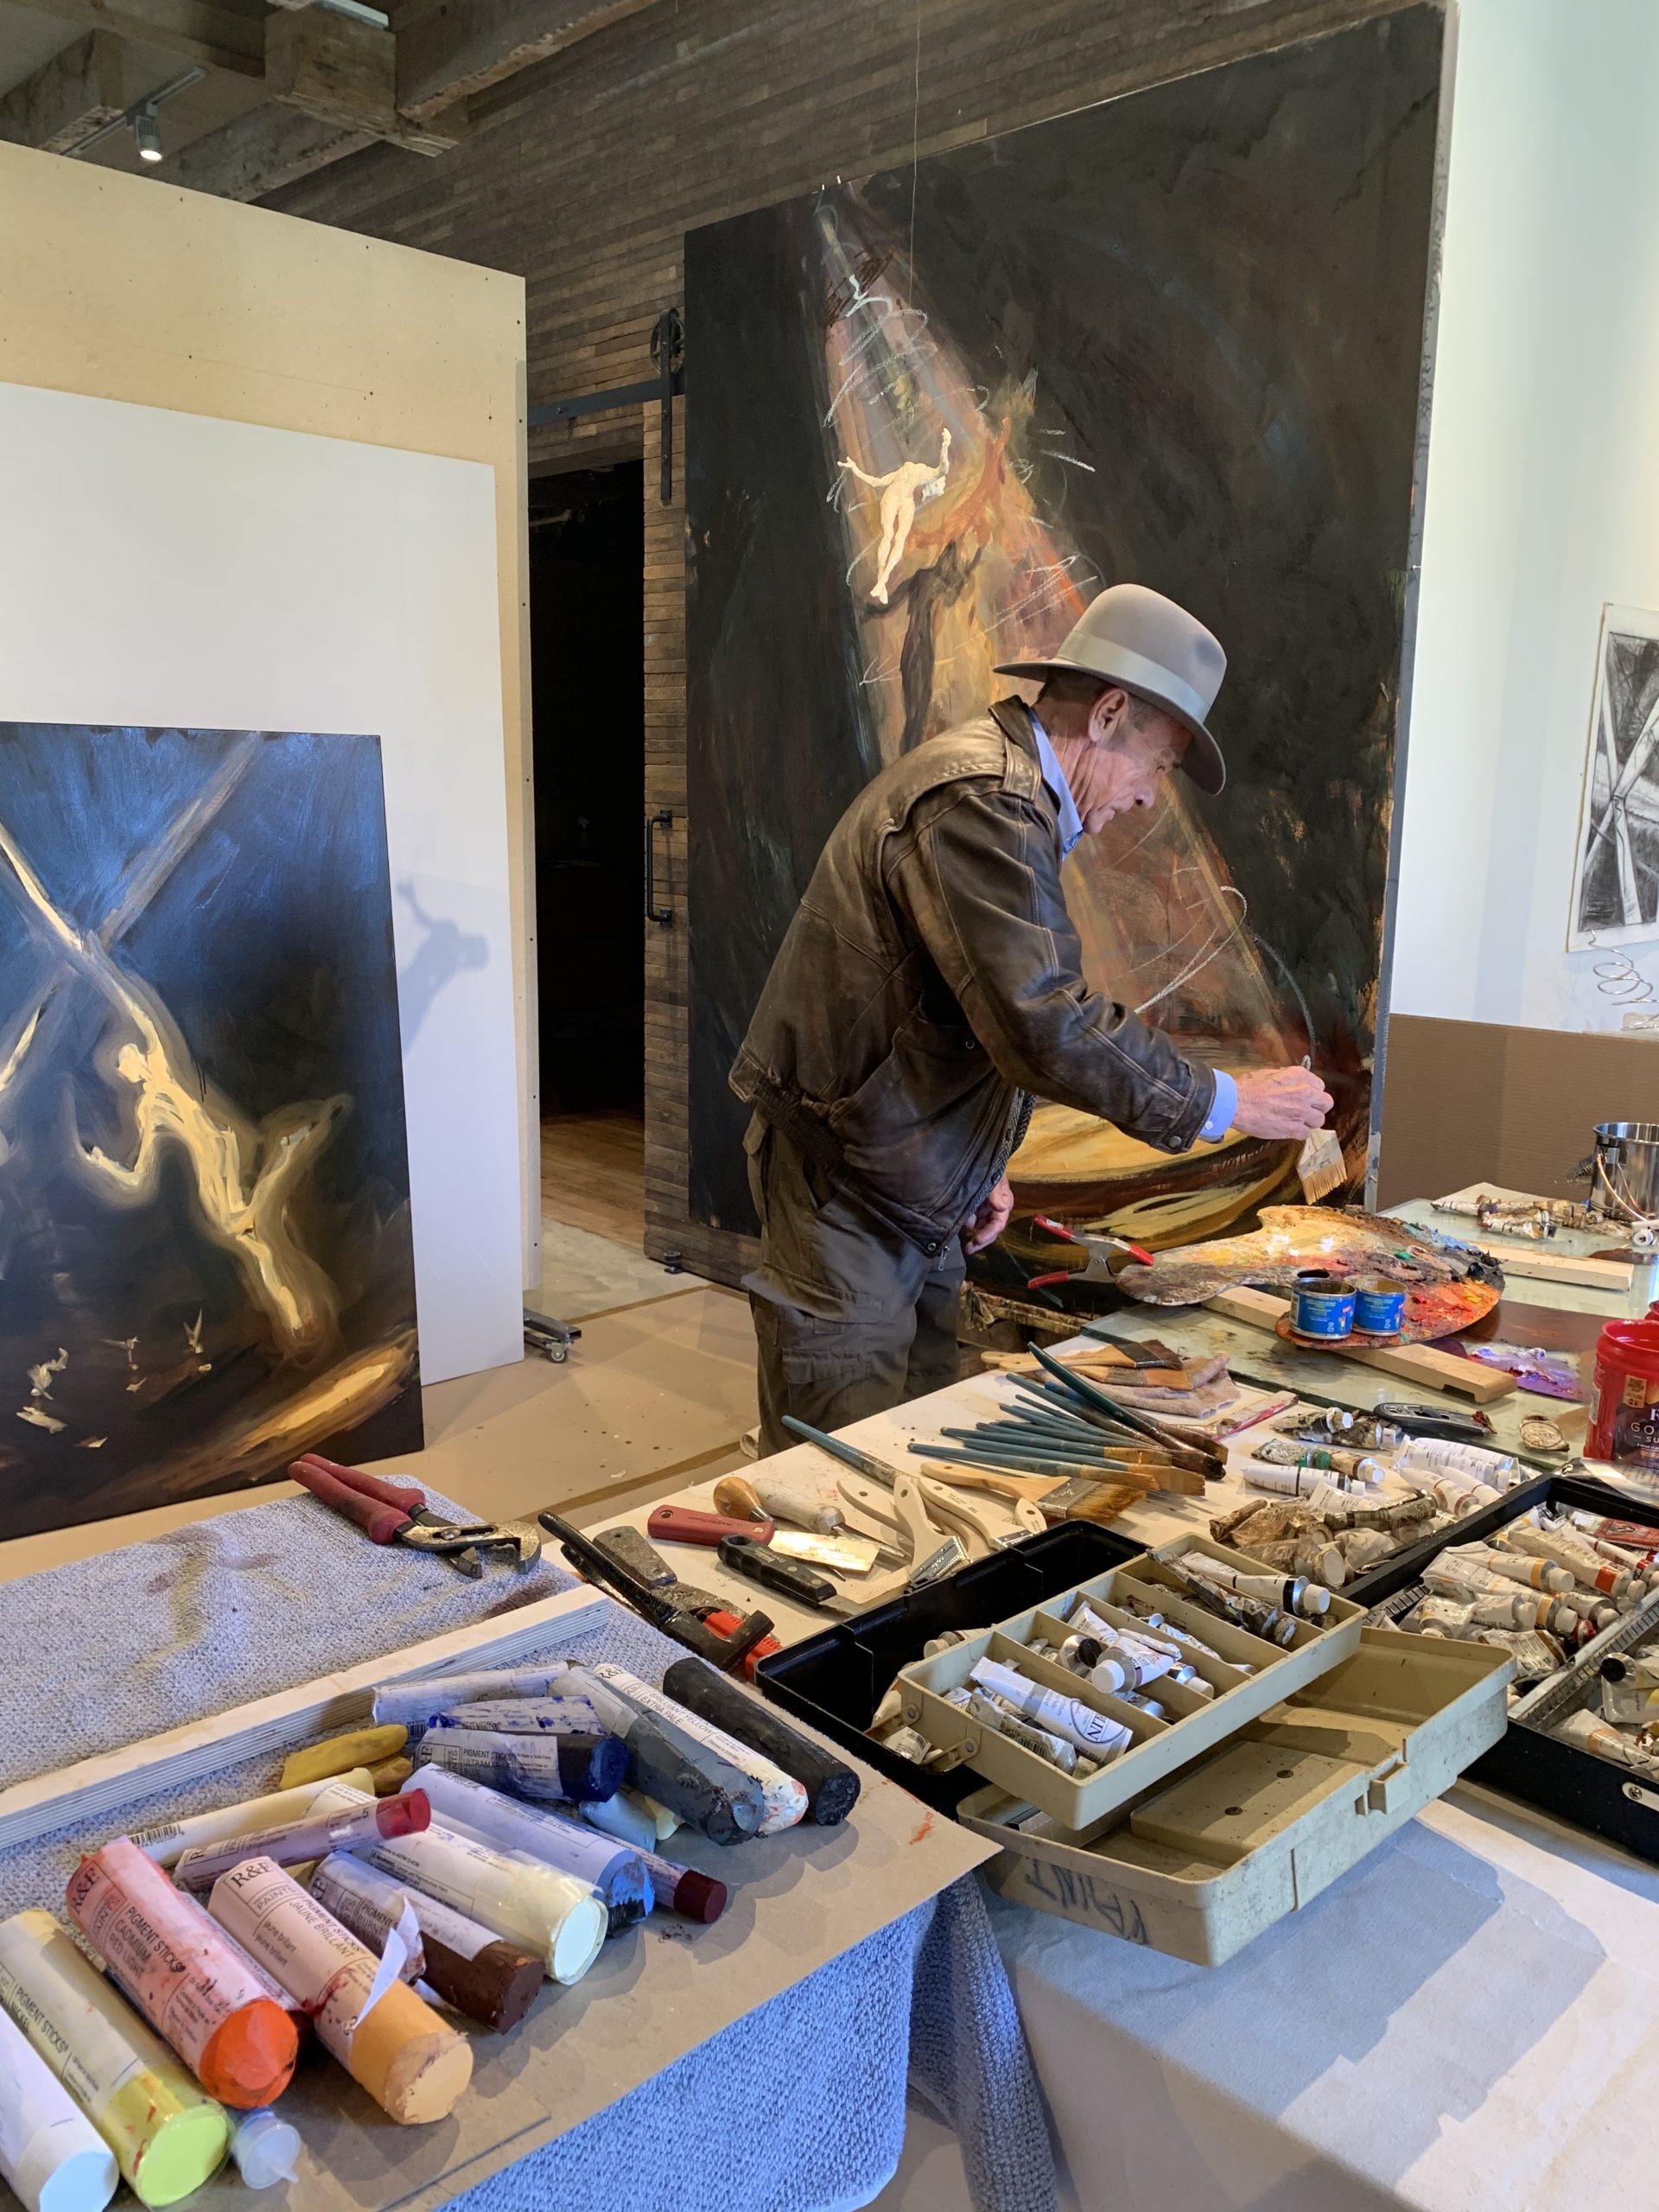 Jim Ginerich at work on a painting.